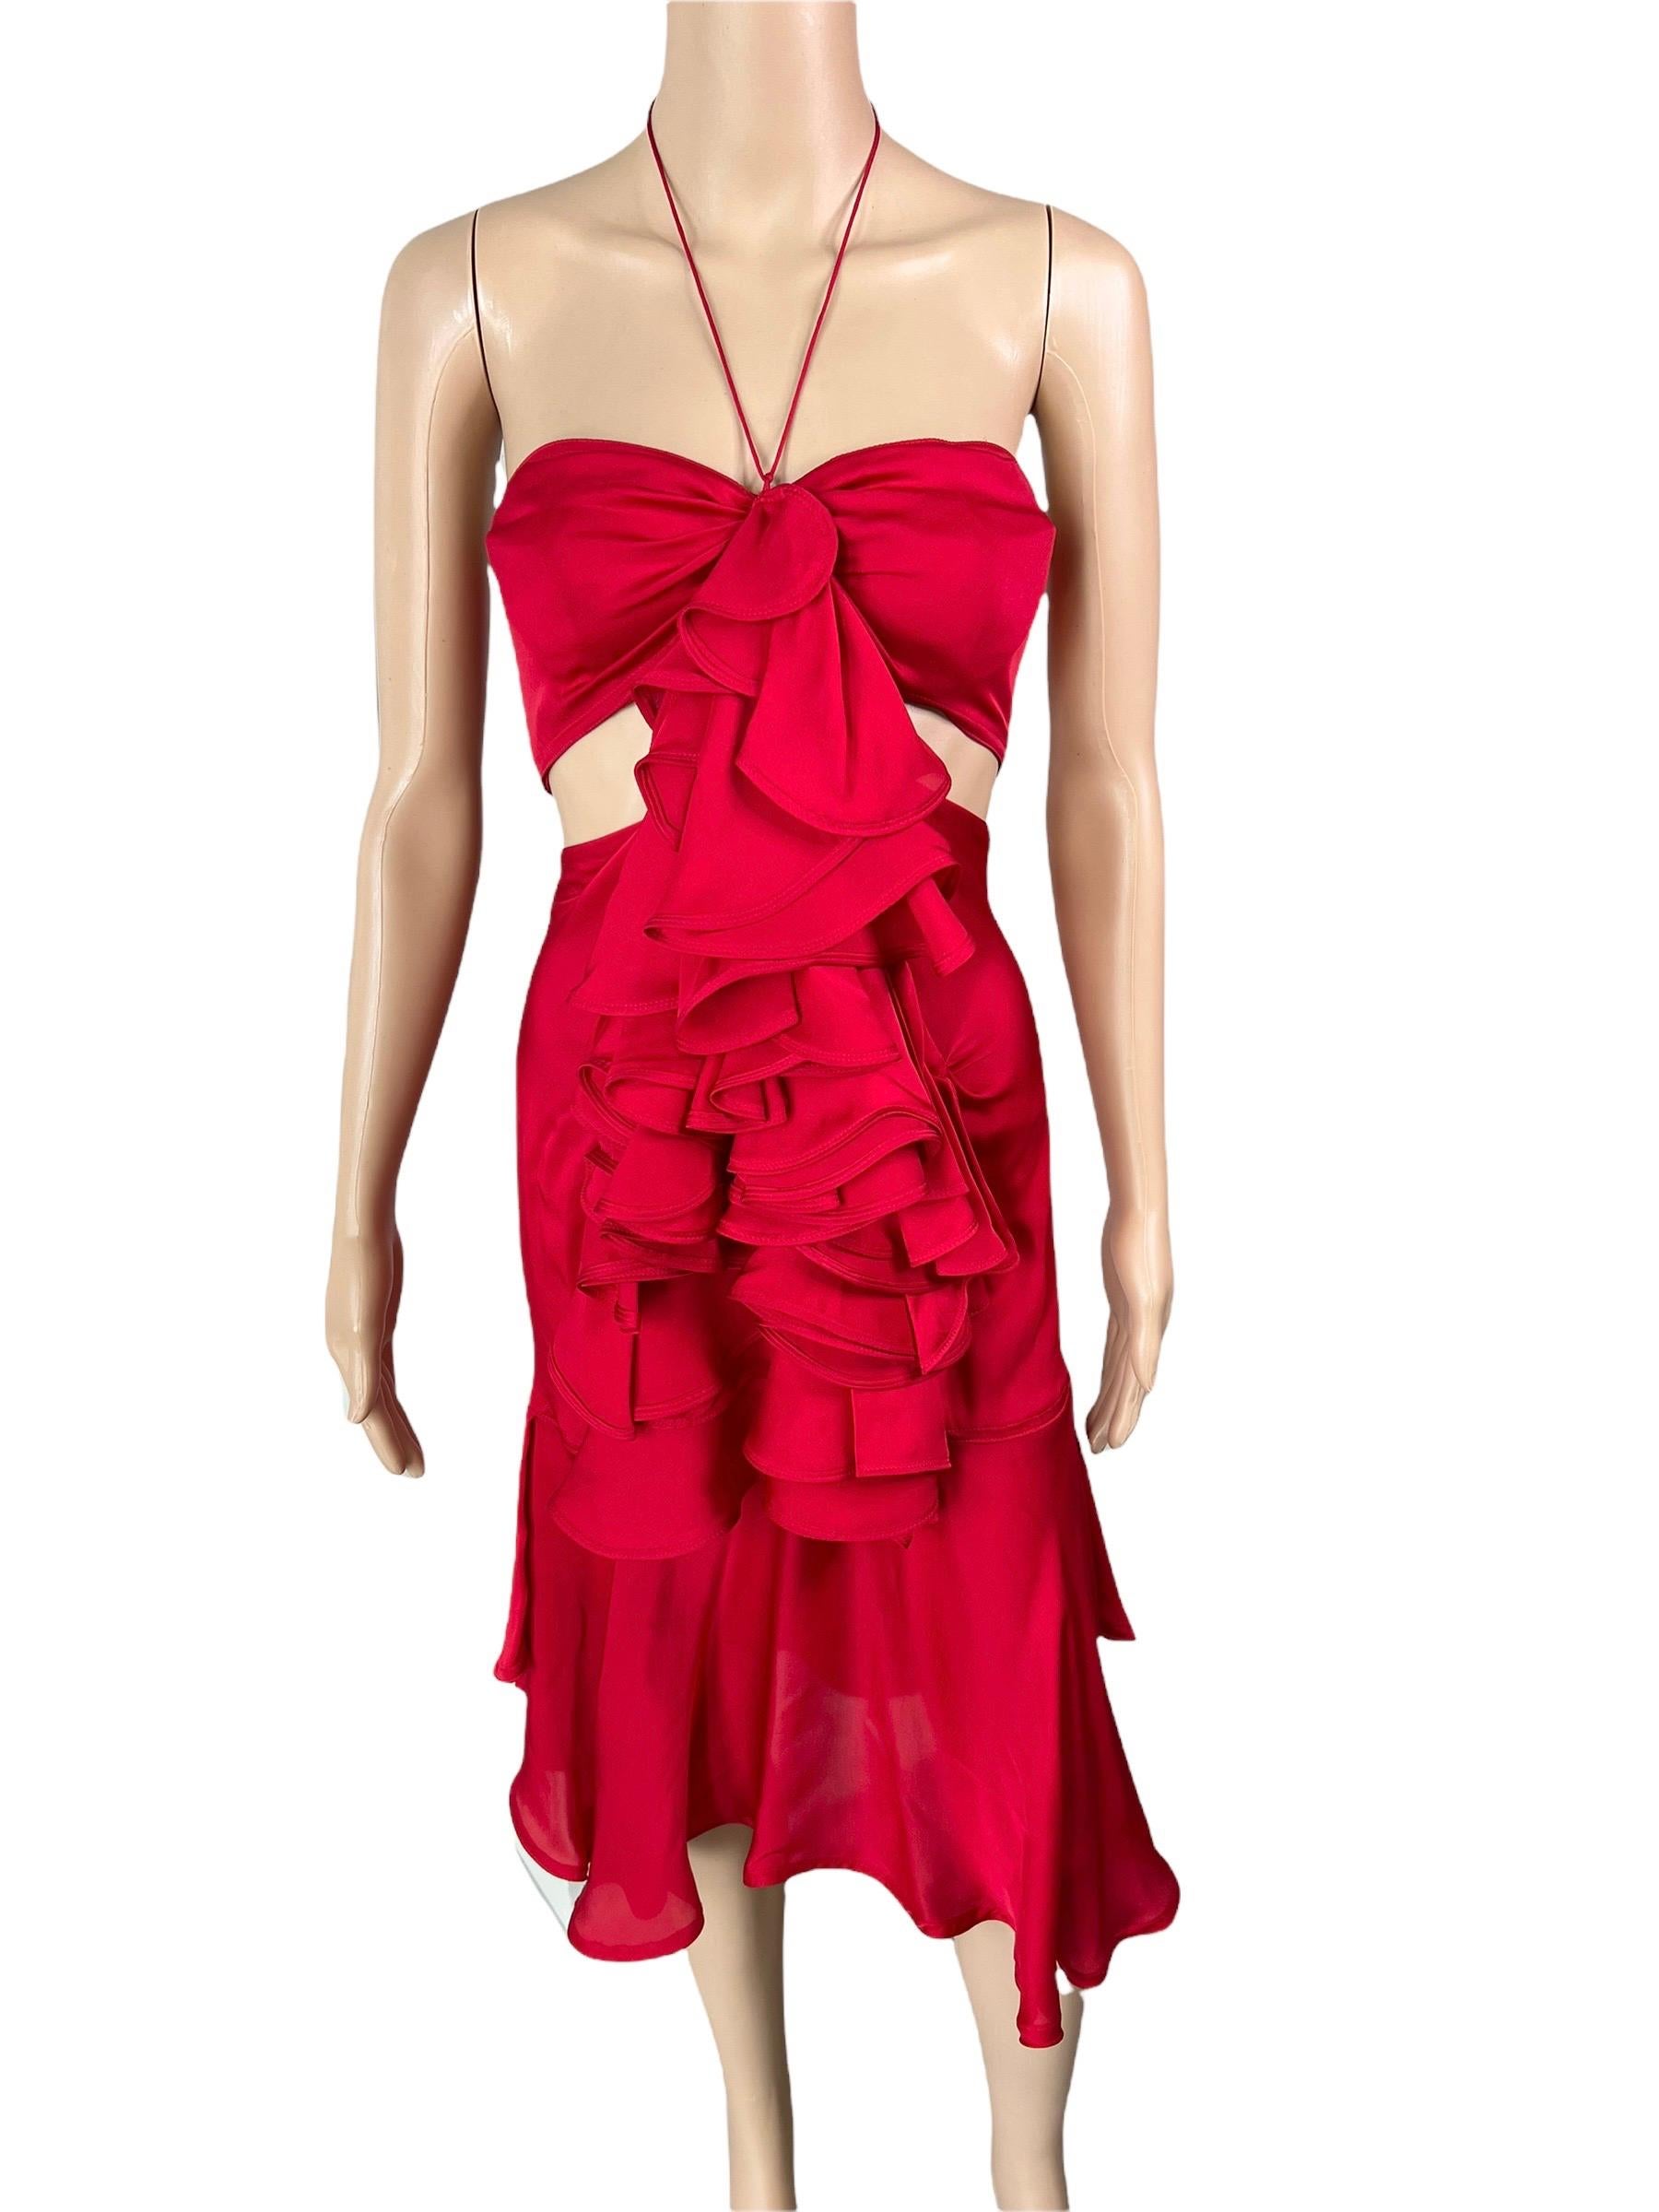 Gray Tom Ford for Yves Saint Laurent  F/W 2003 Runway Ruffled Cutout Bra Red Dress  For Sale